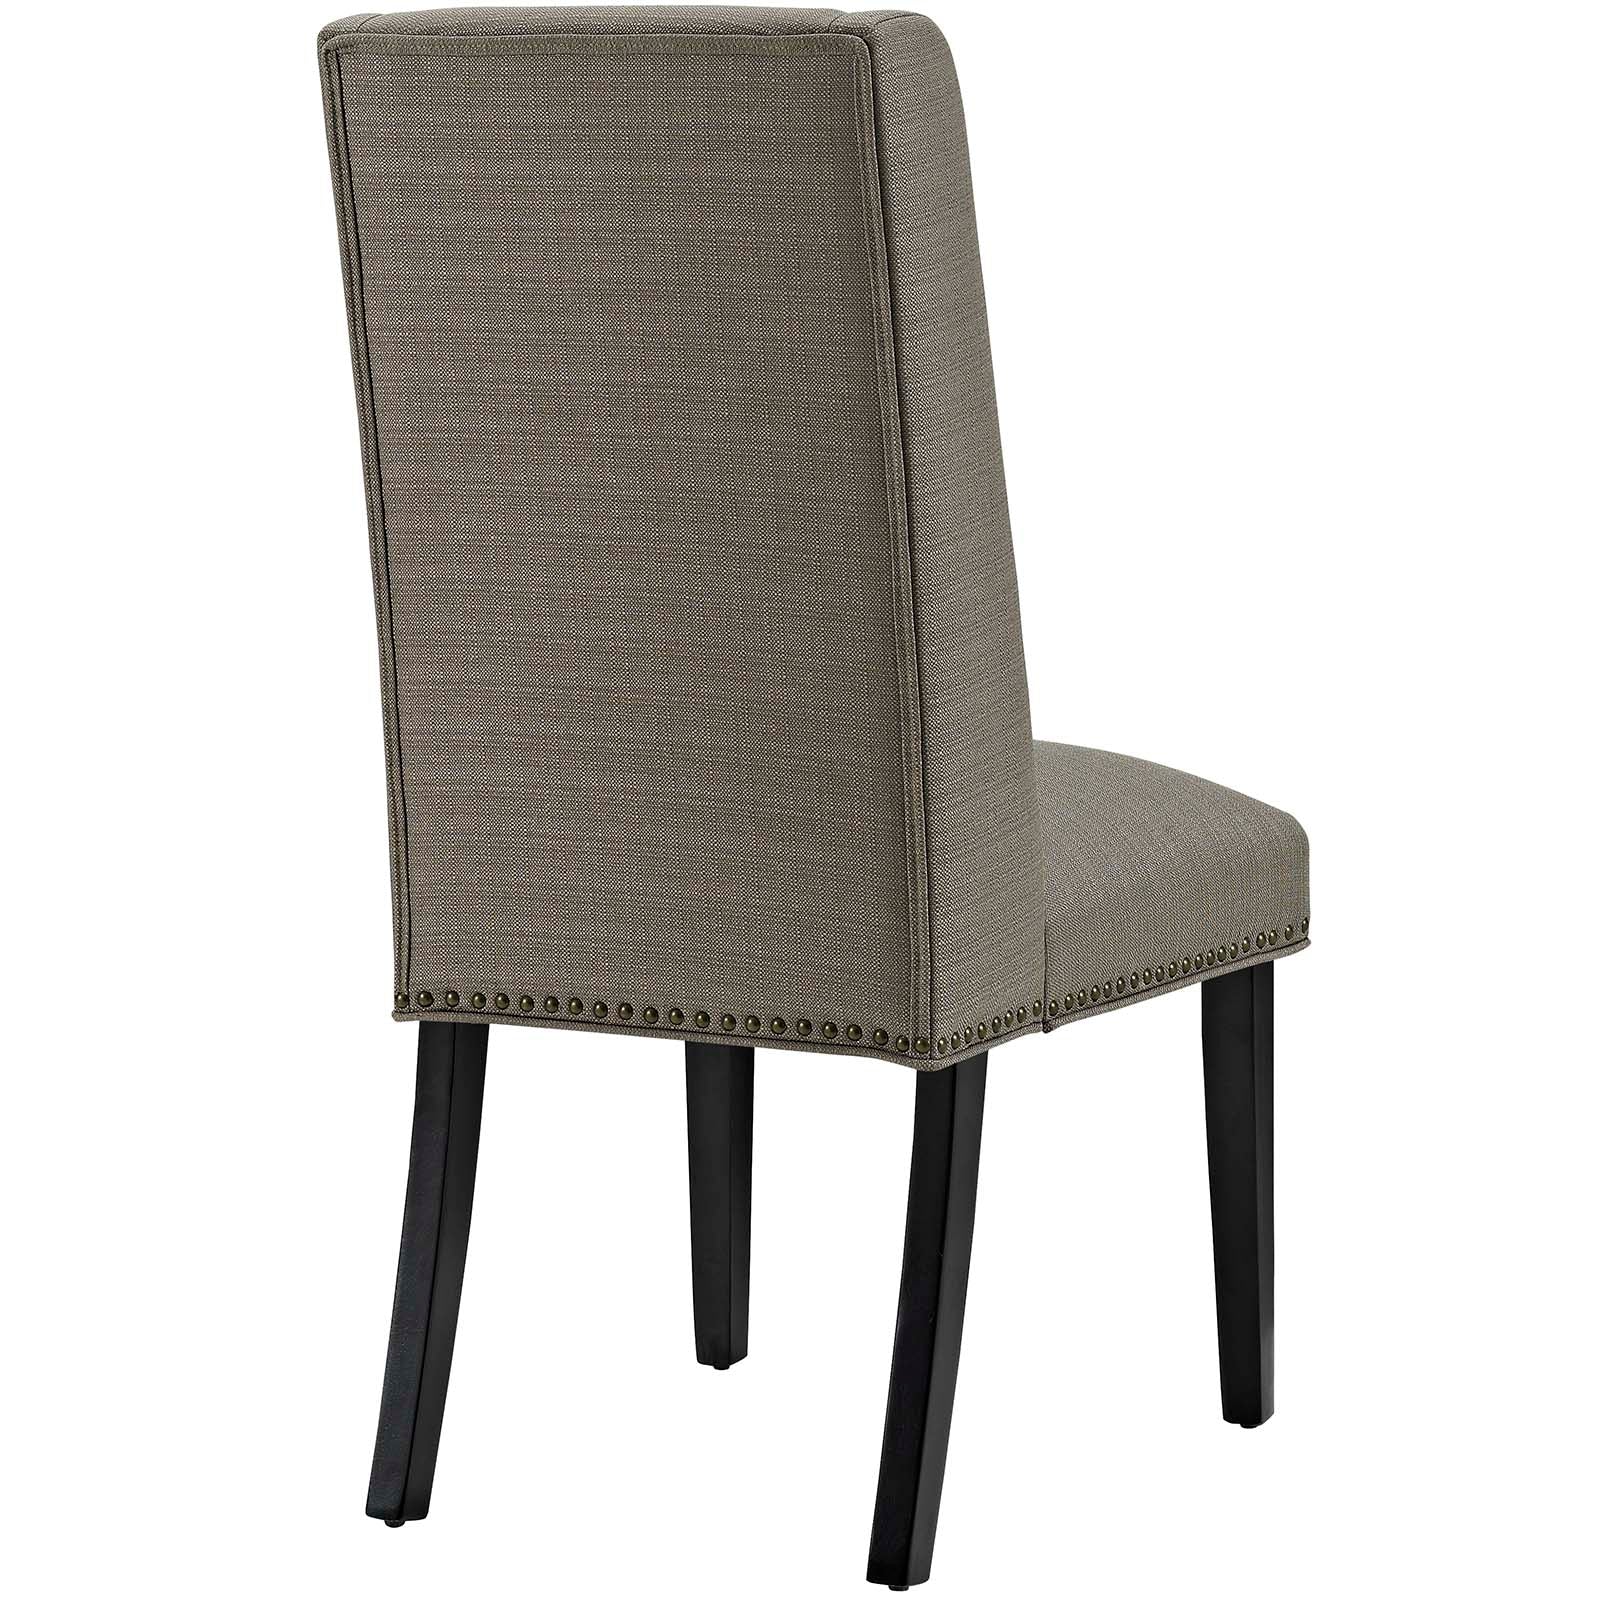 Modway Dining Chairs - Baron Dining Chair Fabric Granite ( Set of 4 )